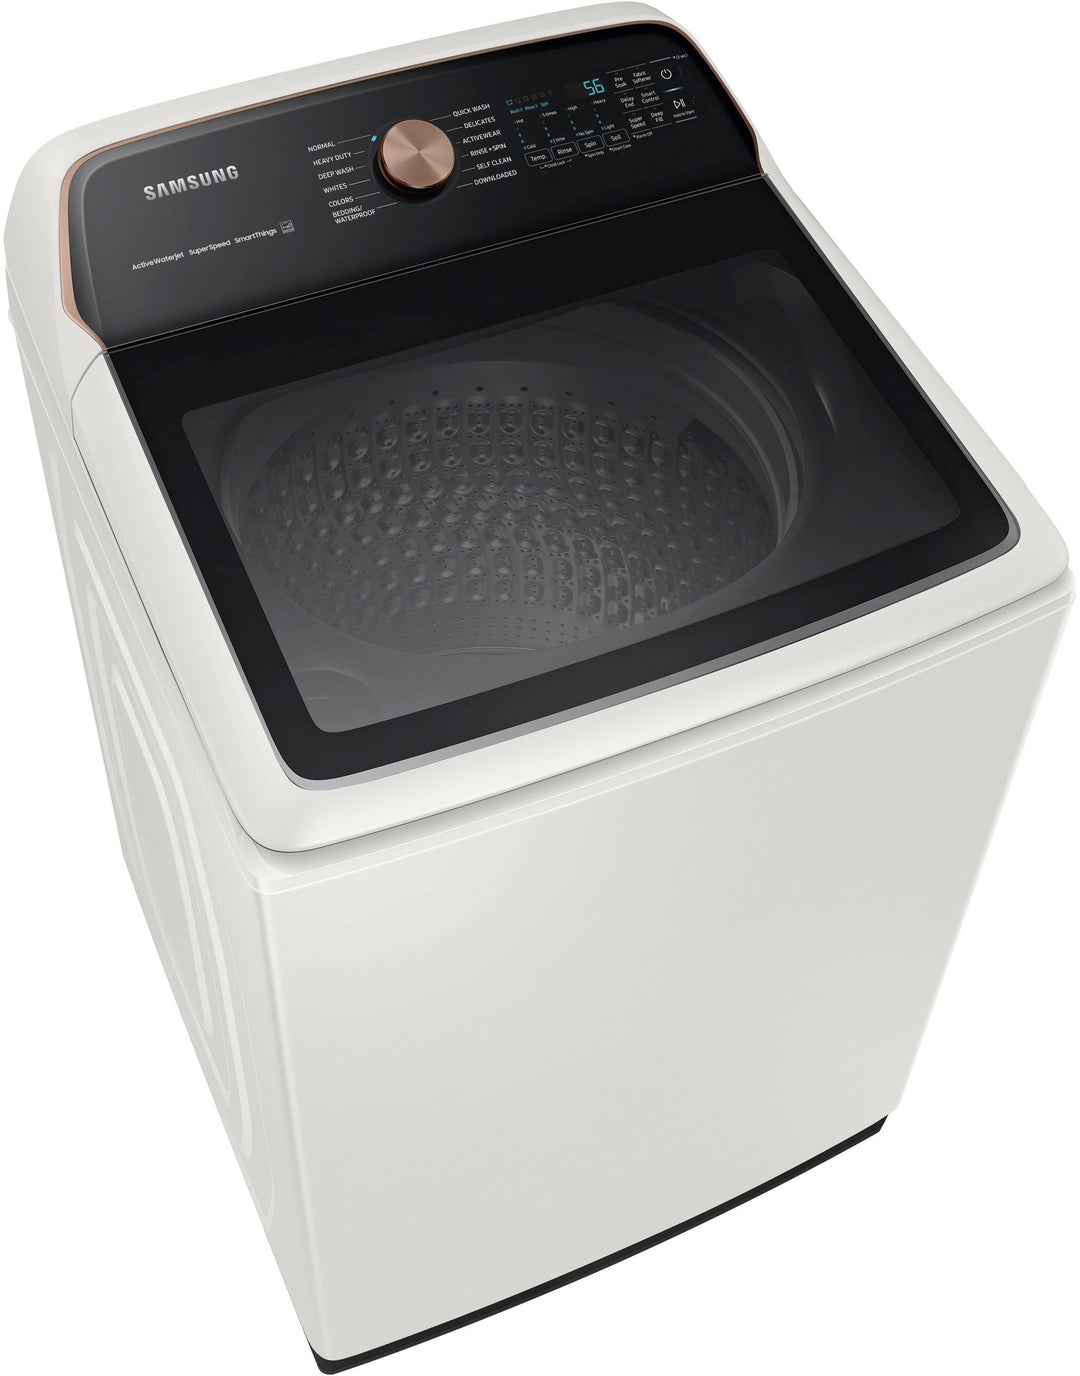 Samsung - 5.5 cu. ft. Extra-Large Capacity Smart Top Load Washer with Super Speed Wash - Ivory_12